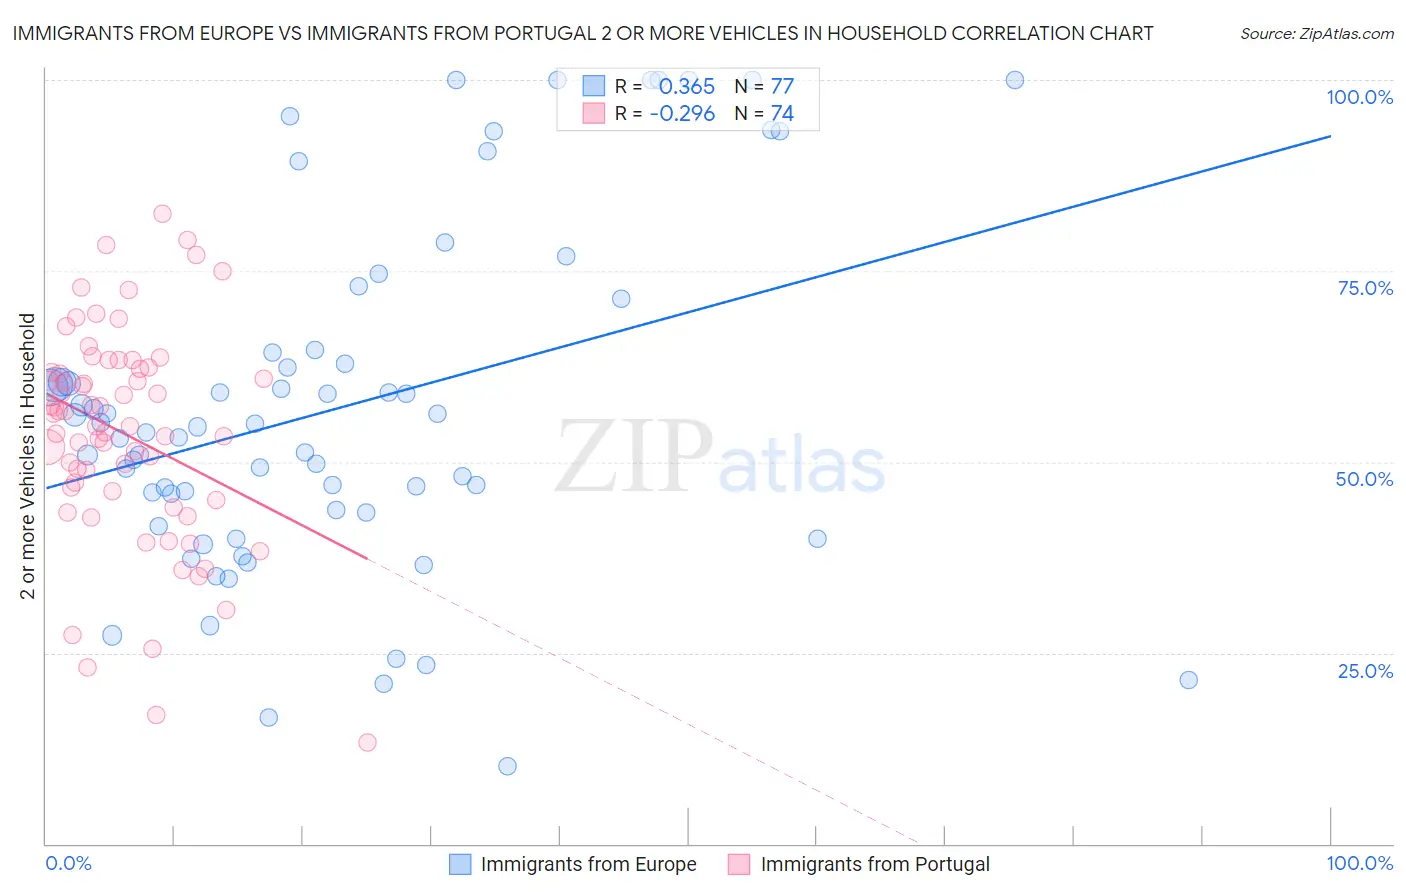 Immigrants from Europe vs Immigrants from Portugal 2 or more Vehicles in Household